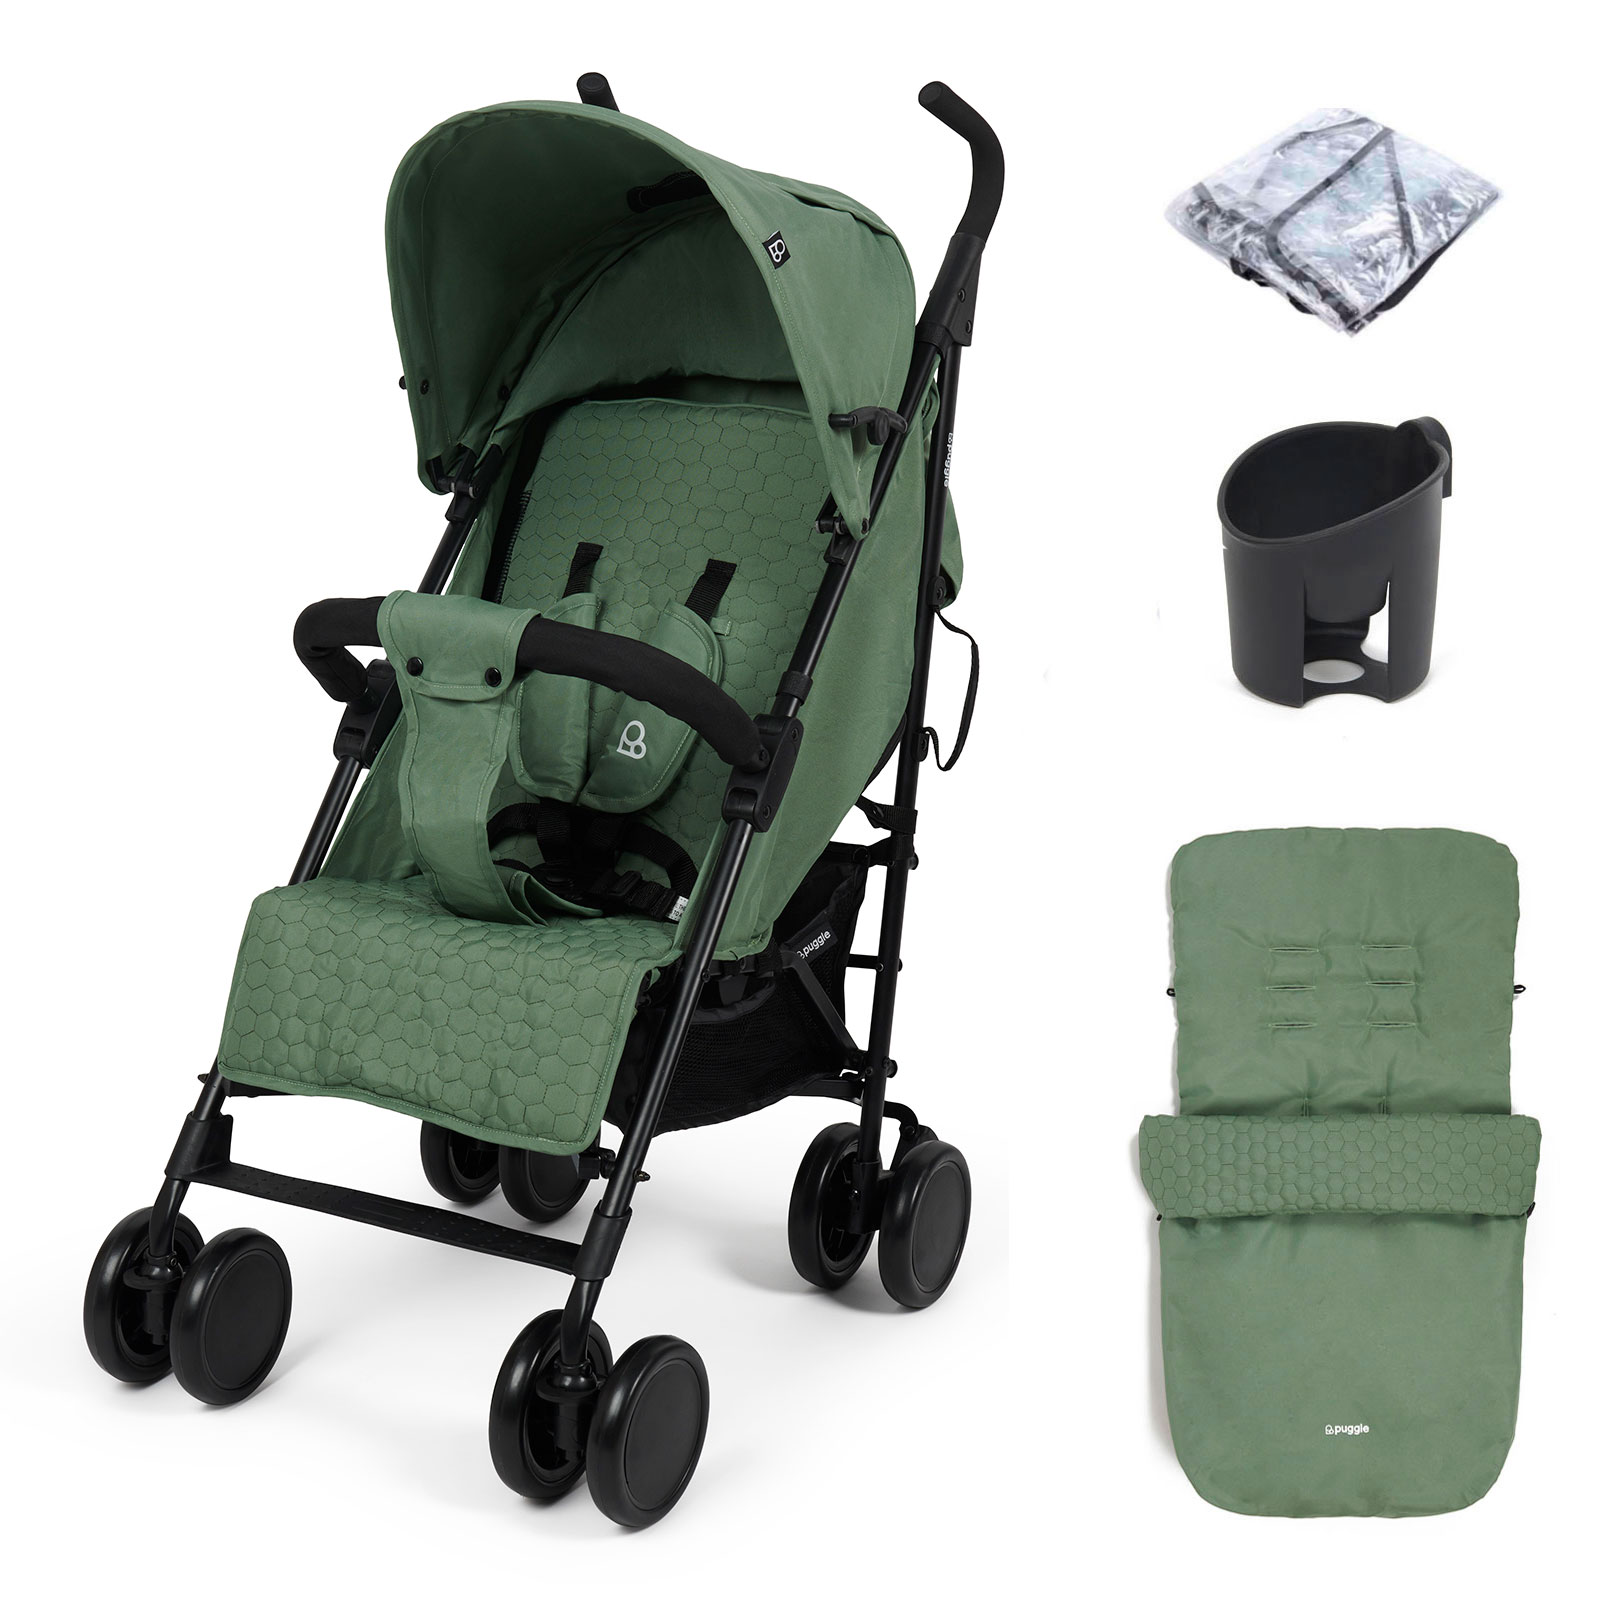 Puggle Litemax Pushchair Stroller with Raincover, Cupholder and Universal Footmuff - Sage Green